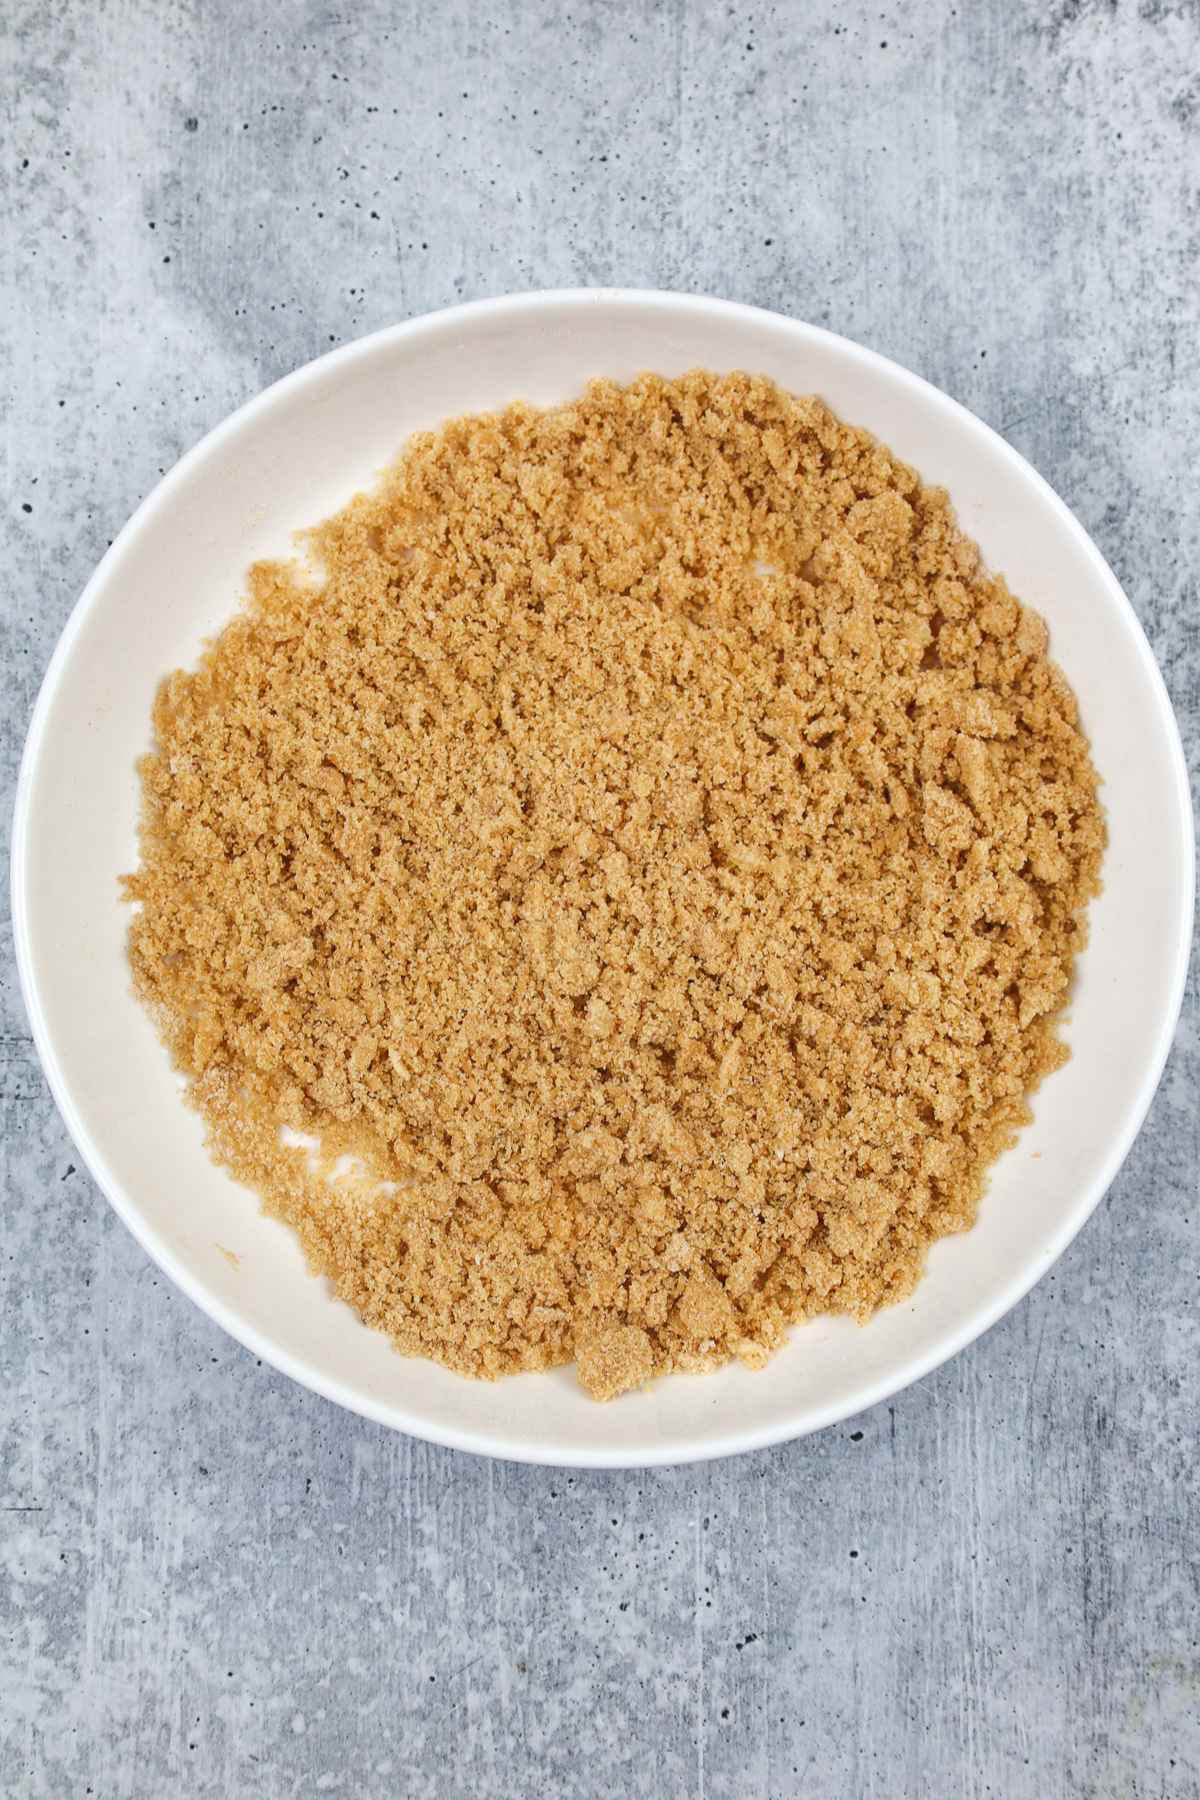 Crumble topping in a white bowl.